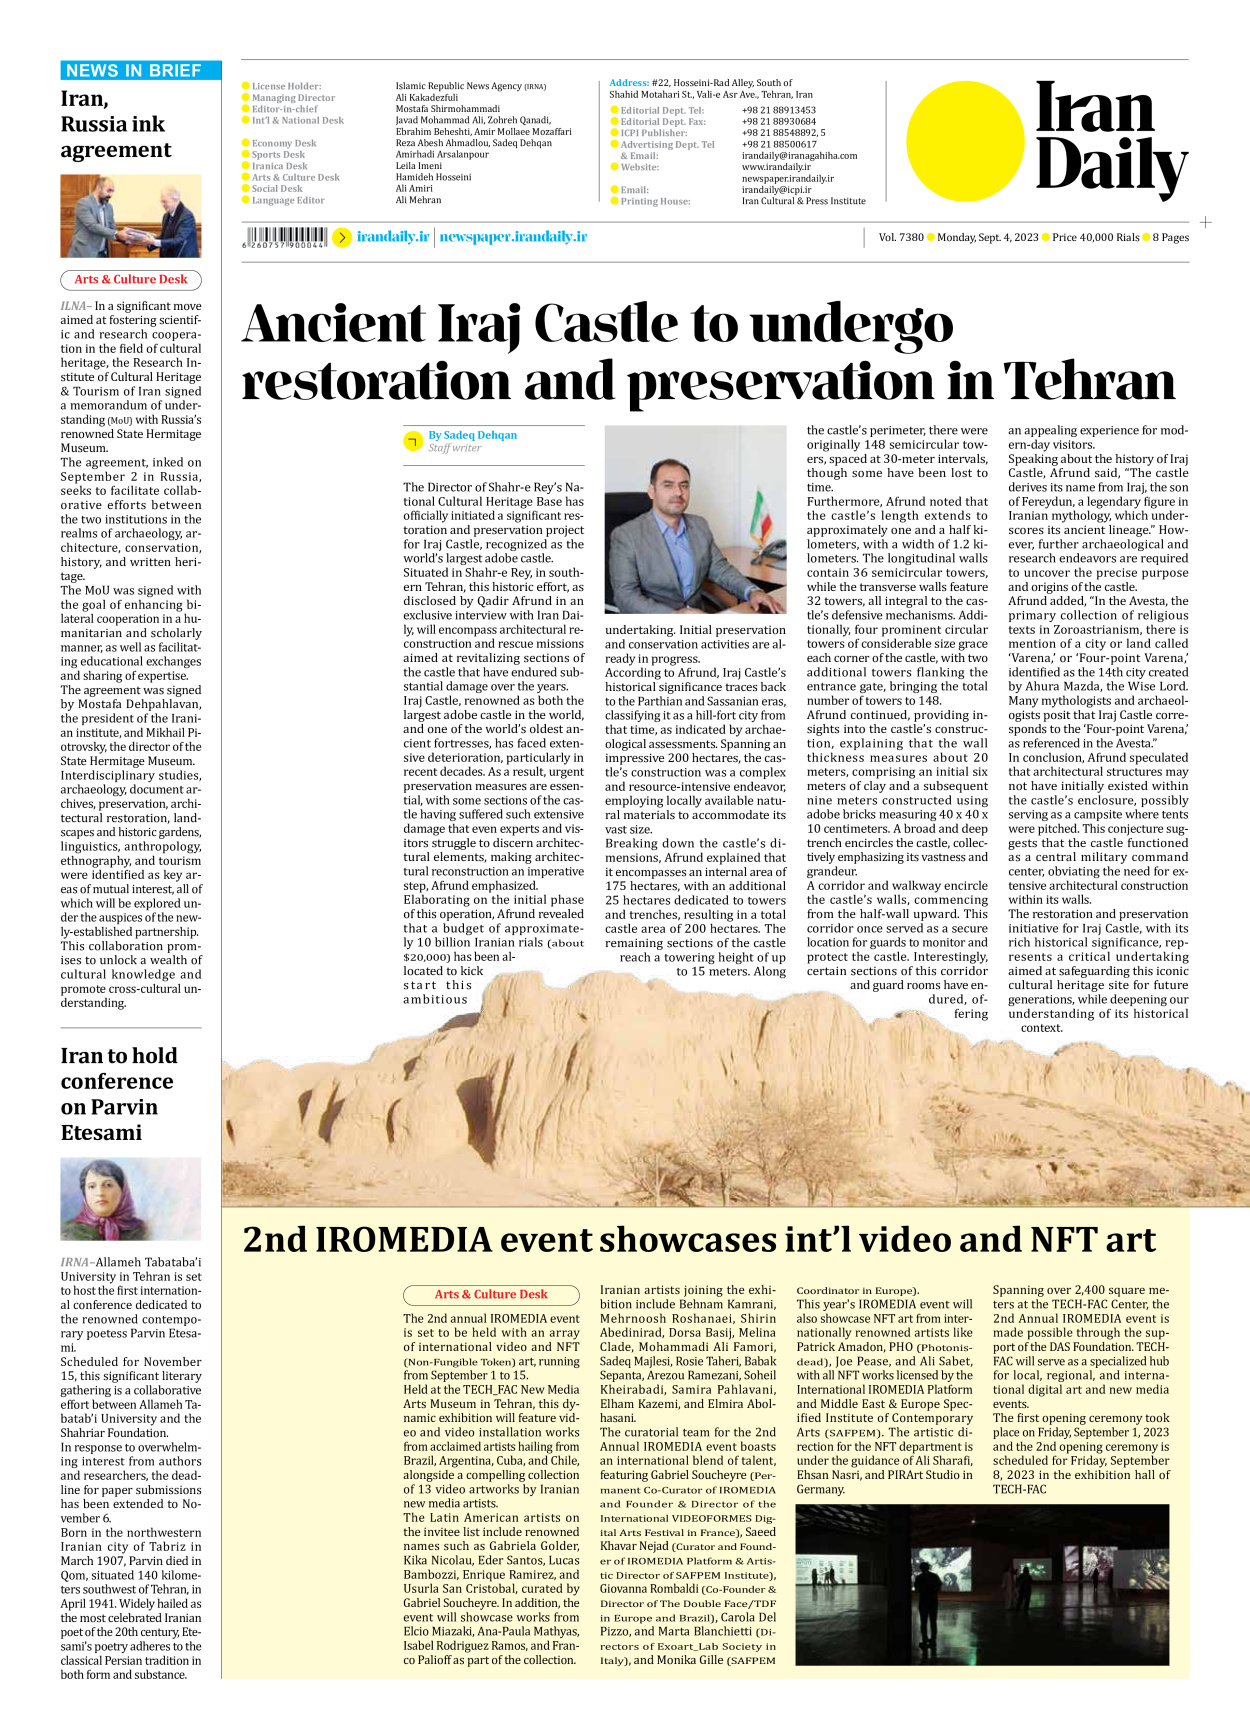 Iran Daily - Number Seven Thousand Three Hundred and Eighty - 04 September 2023 - Page 8